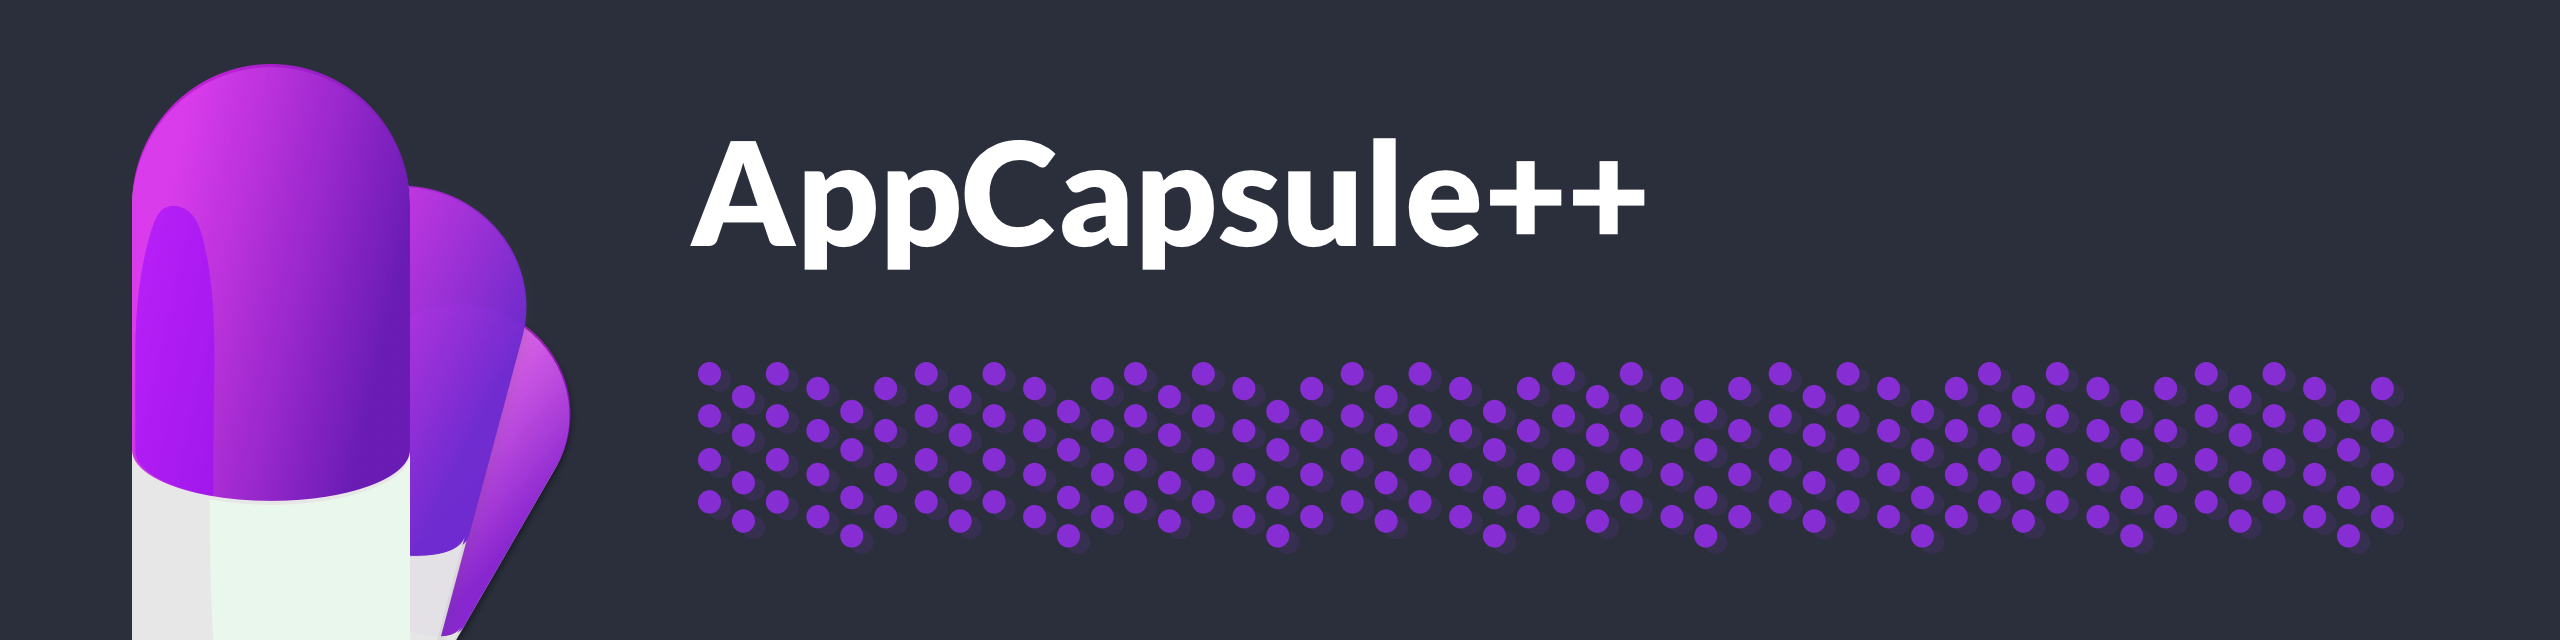 AppCapsule++, the 2nd generation of MMCloud snapshot technology to support bigger workloads and reduce overhead